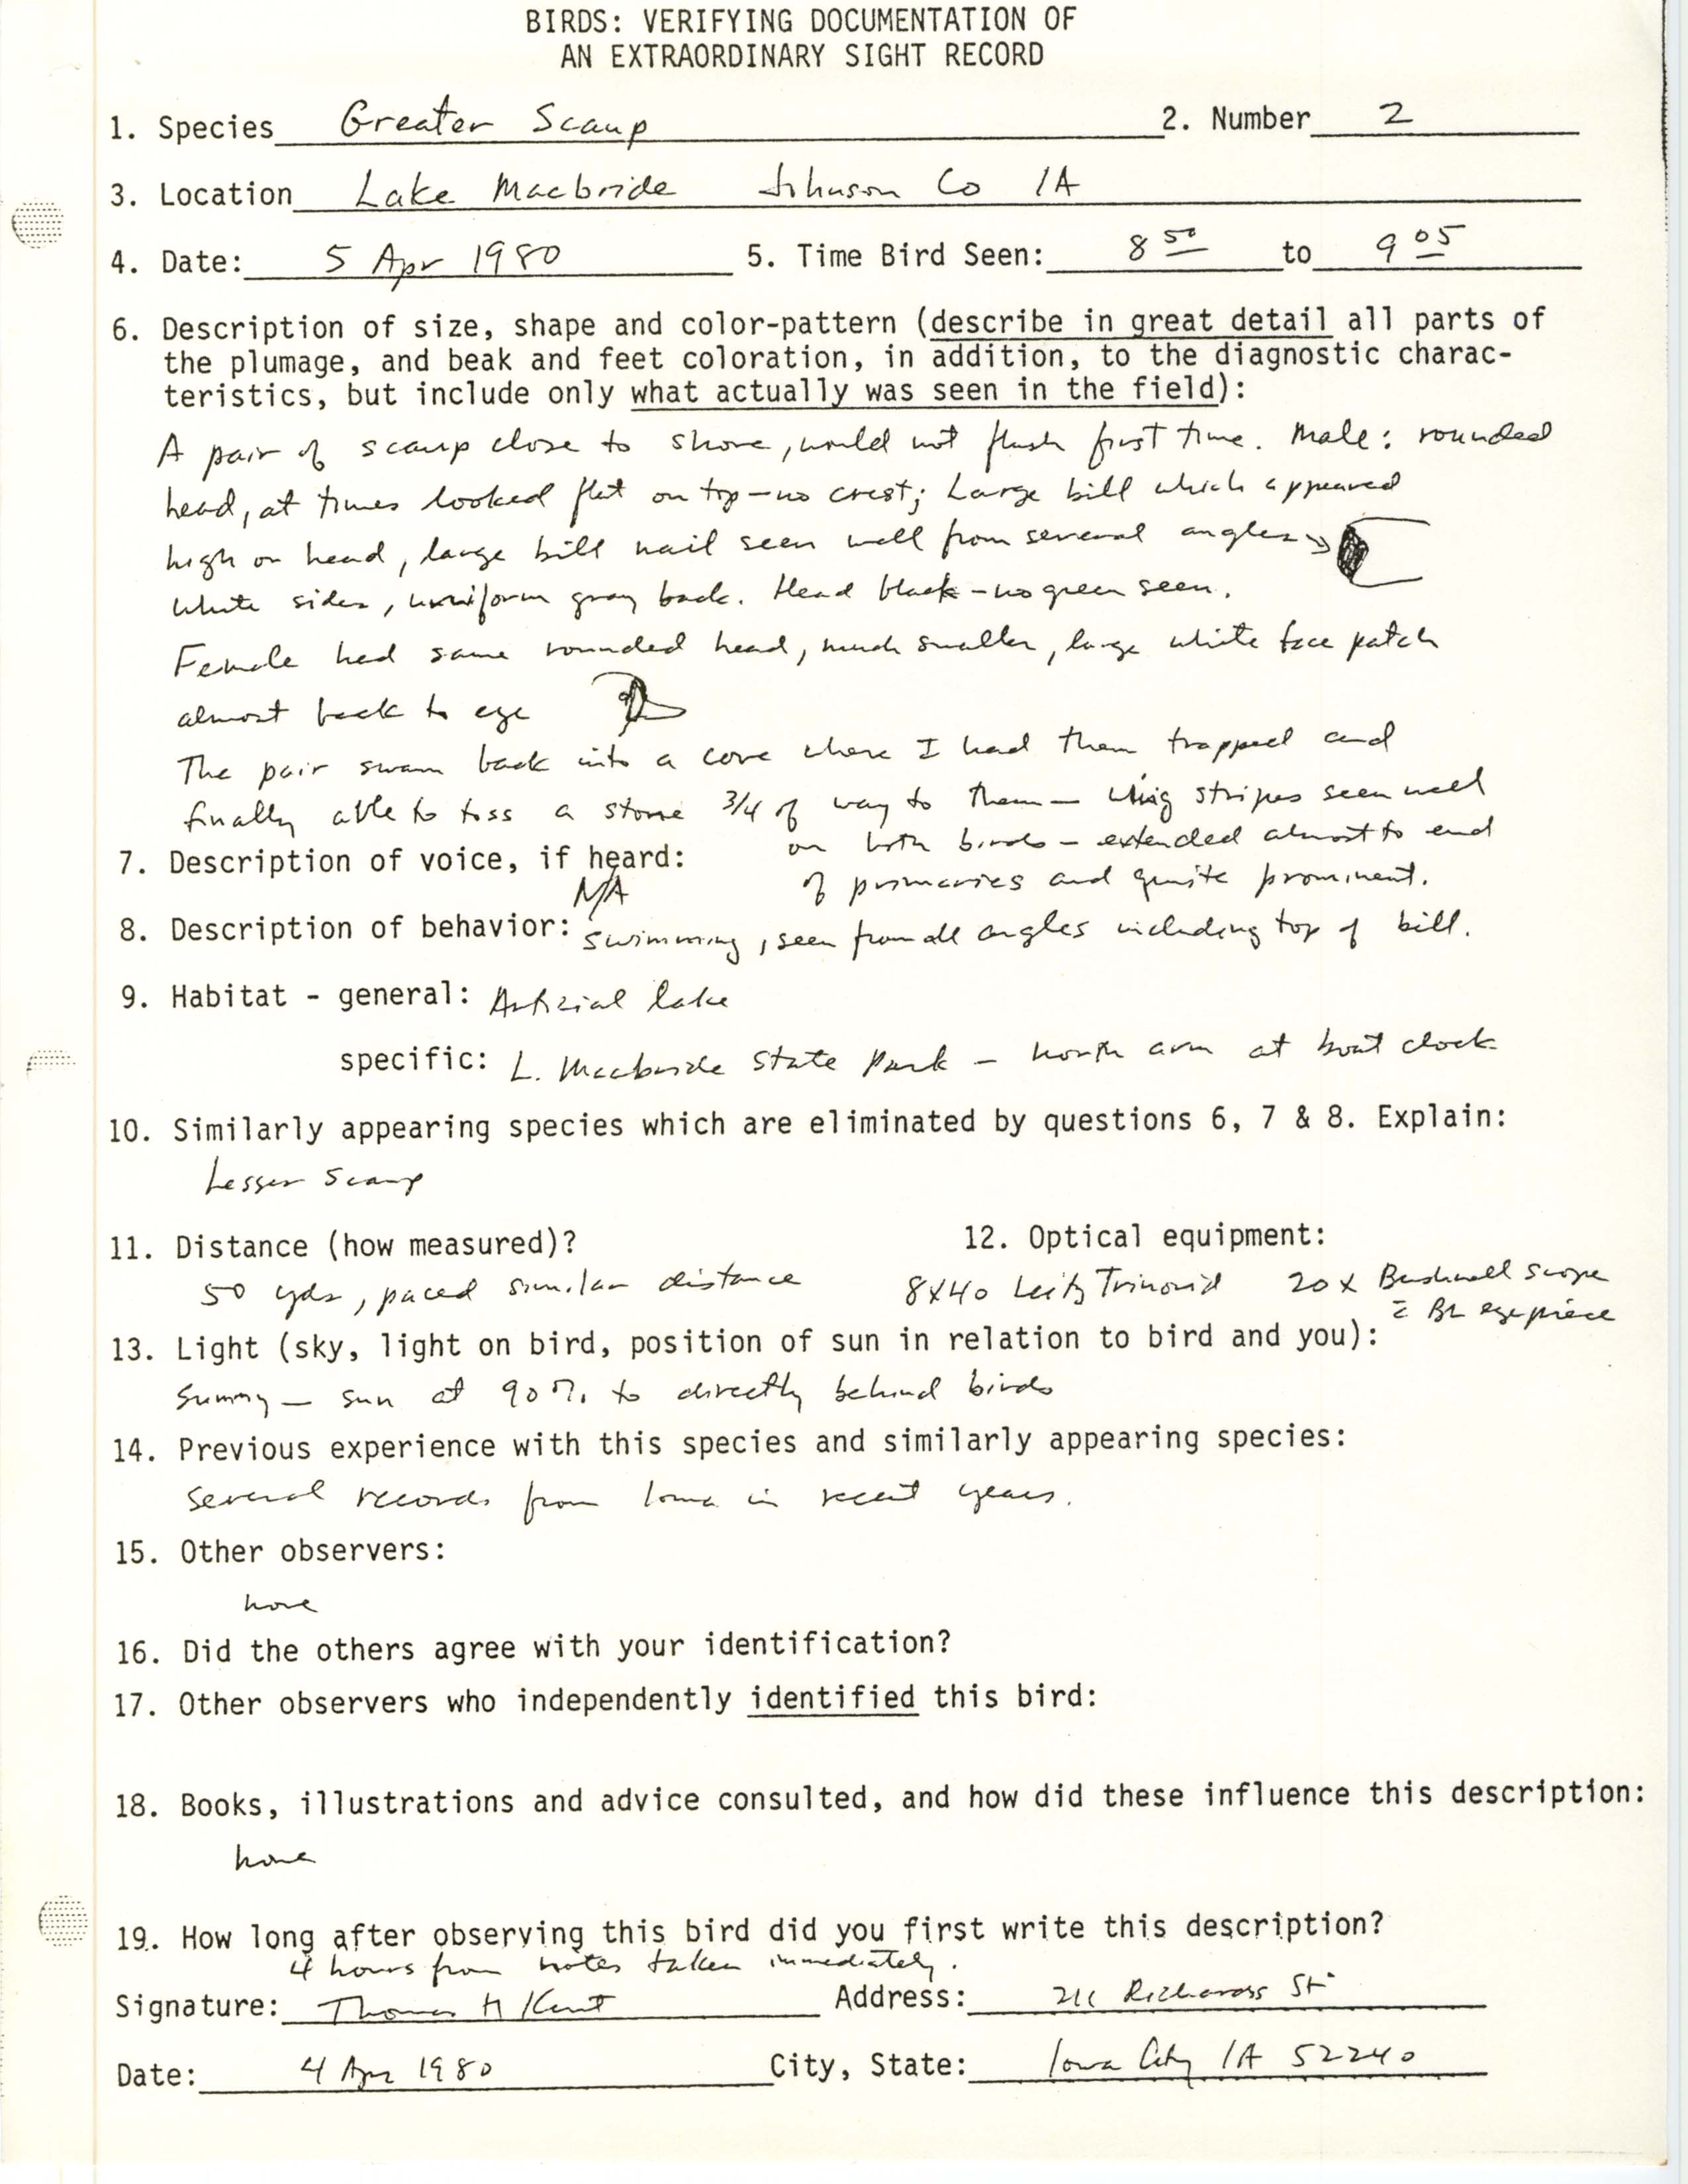 Rare bird documentation form for Greater Scaup at Lake Macbride, 1980